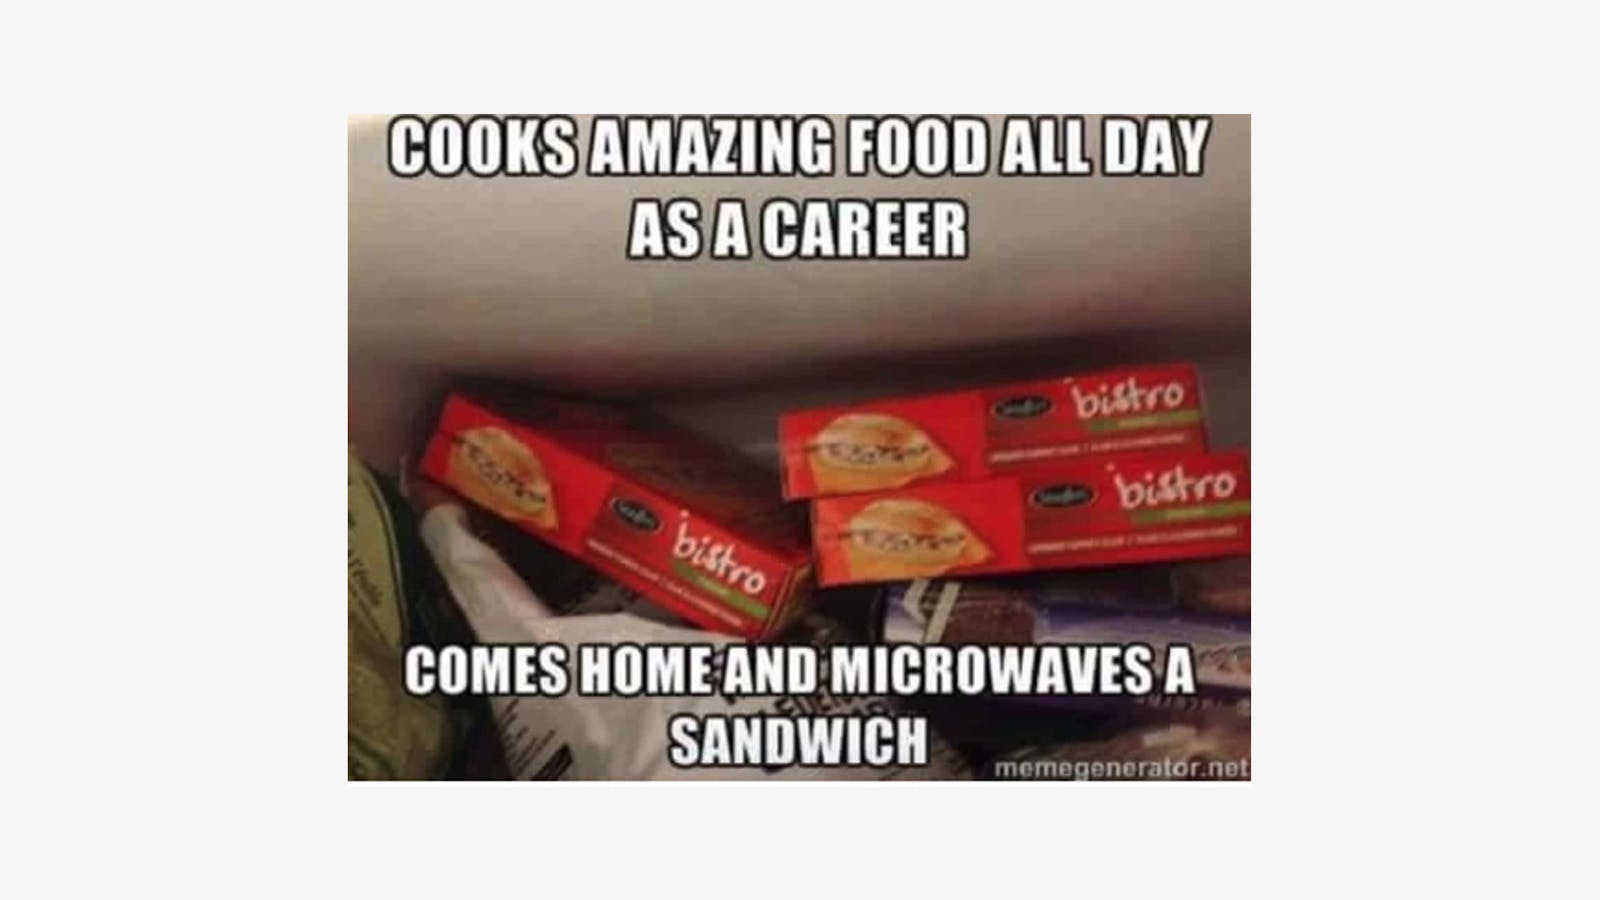 Relatable restaurant meme: "cooks amazing food all day, comes home and microwaves." 